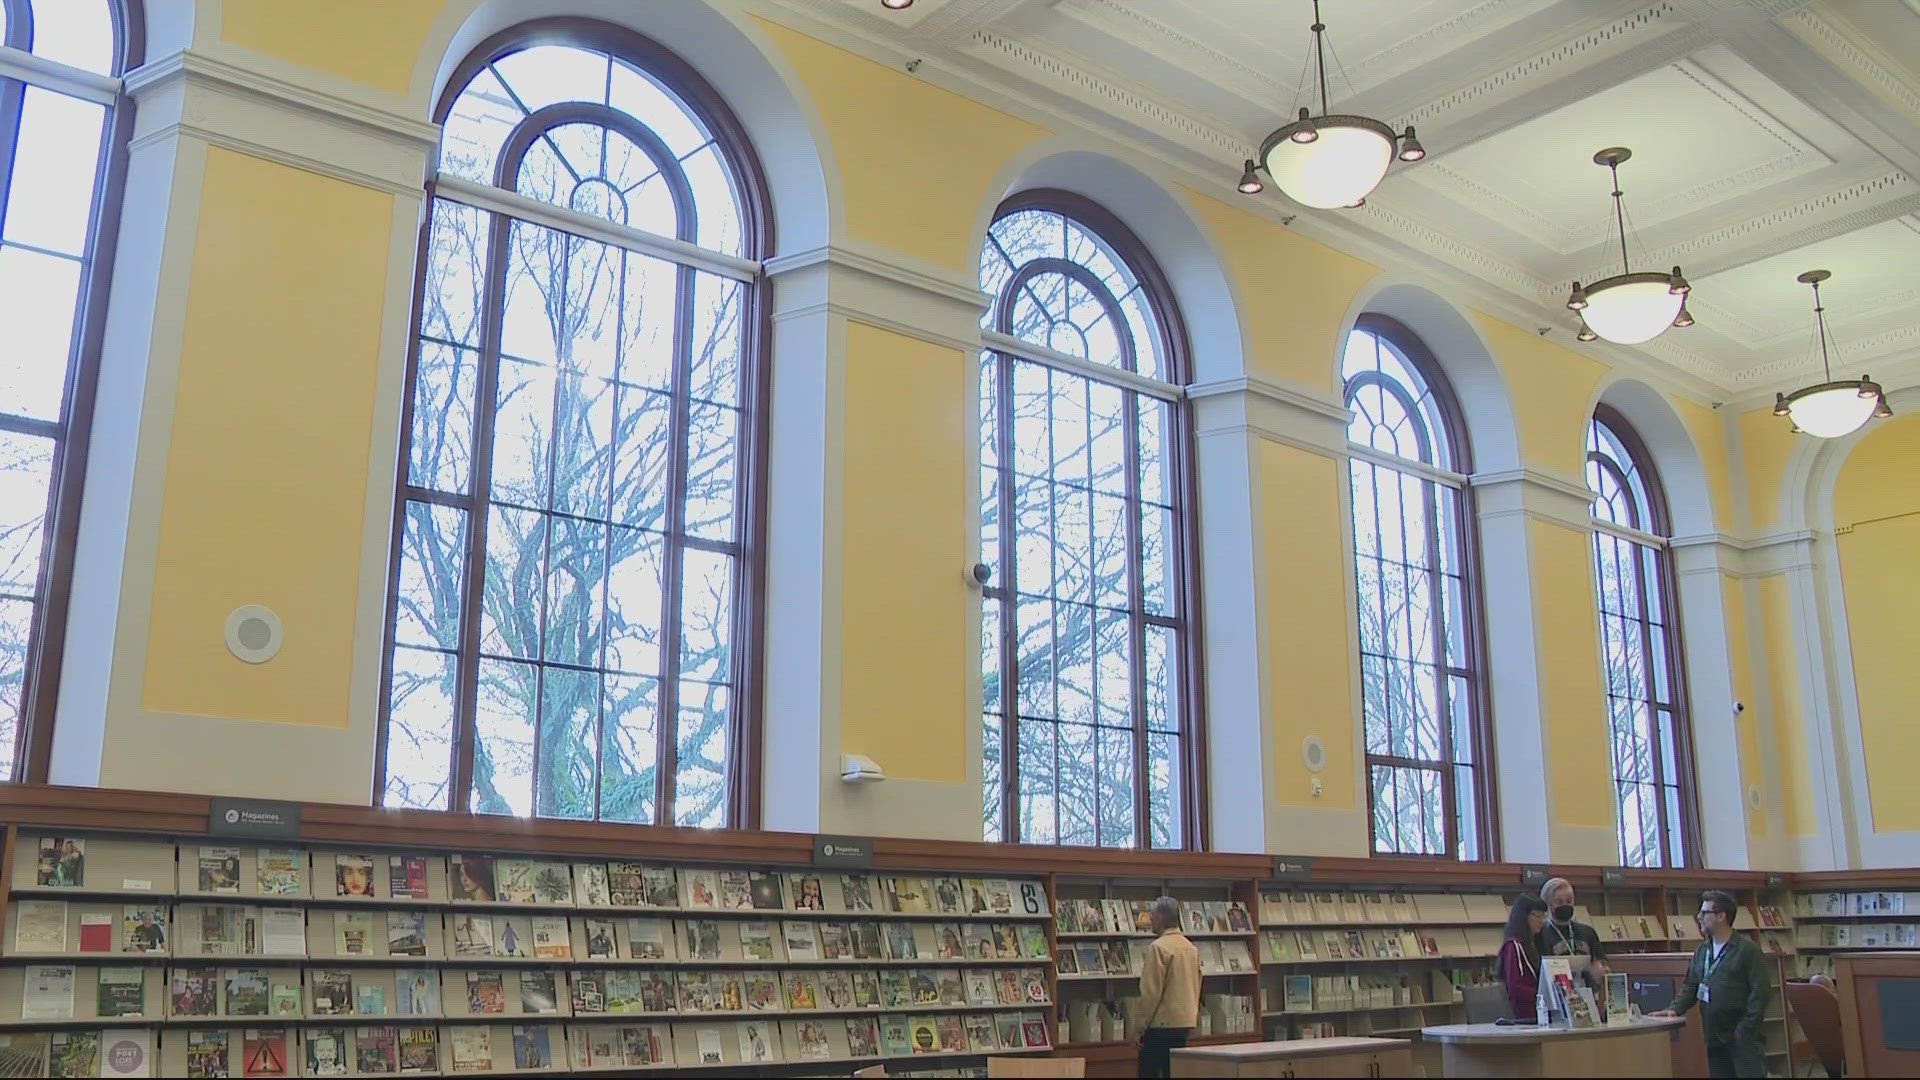 After closed for nearly a year, Central Library in downtown Portland is set to reopen with brand new amenities, gender-inclusive restrooms and private rooms.